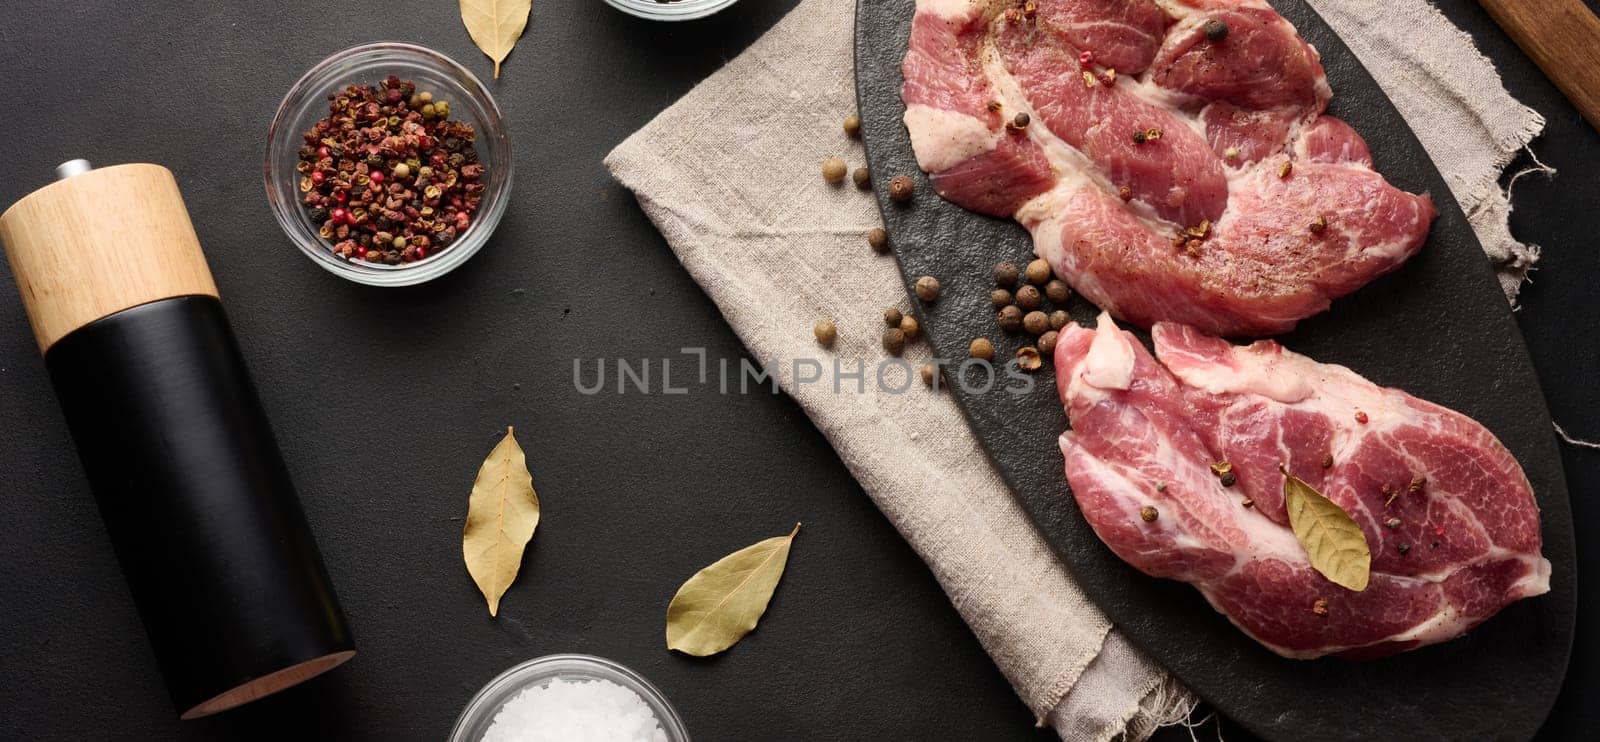 Two raw pork neck steaks on a board and spices for cooking. Top view  by ndanko